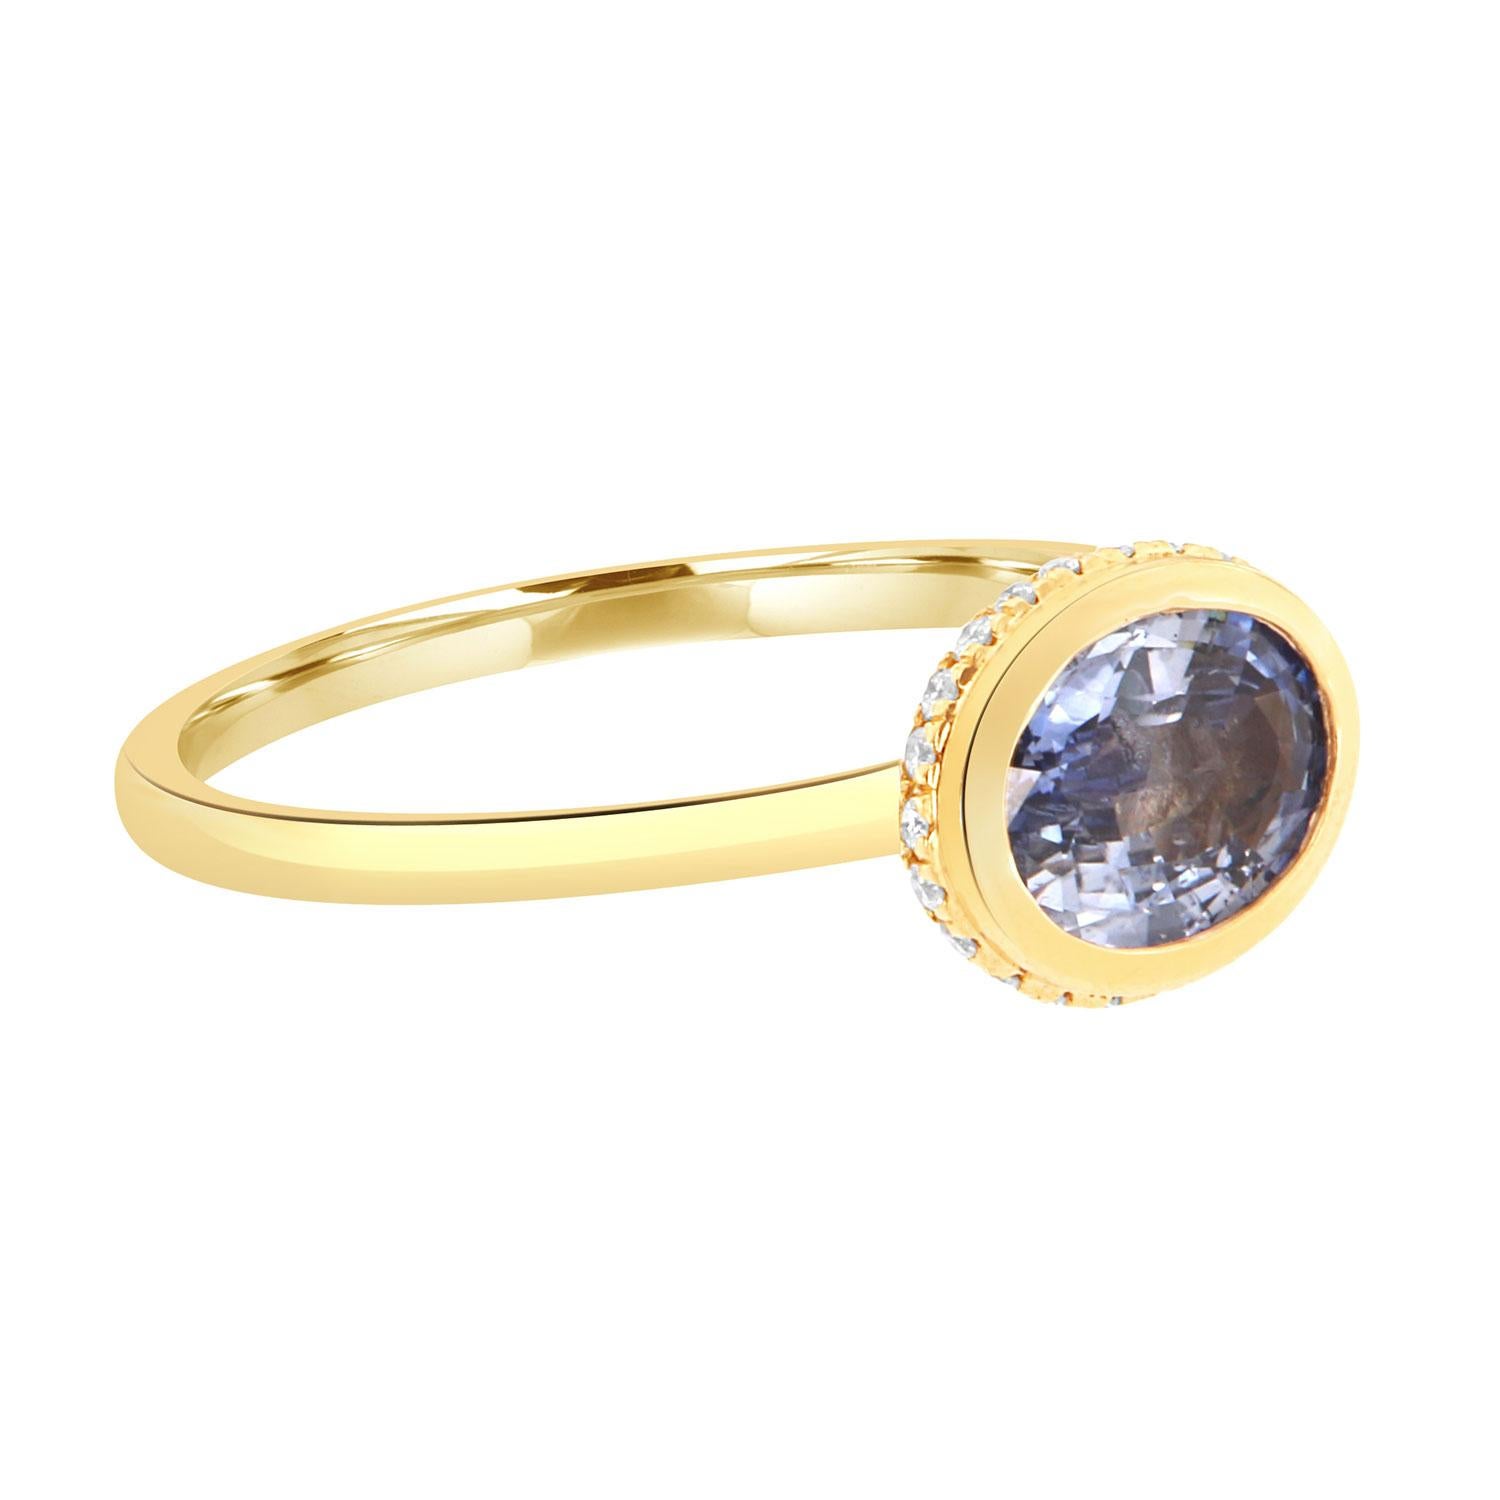 This delicate 18k yellow gold ring features a GIA-certified 1.11 Carat Oval-shaped 